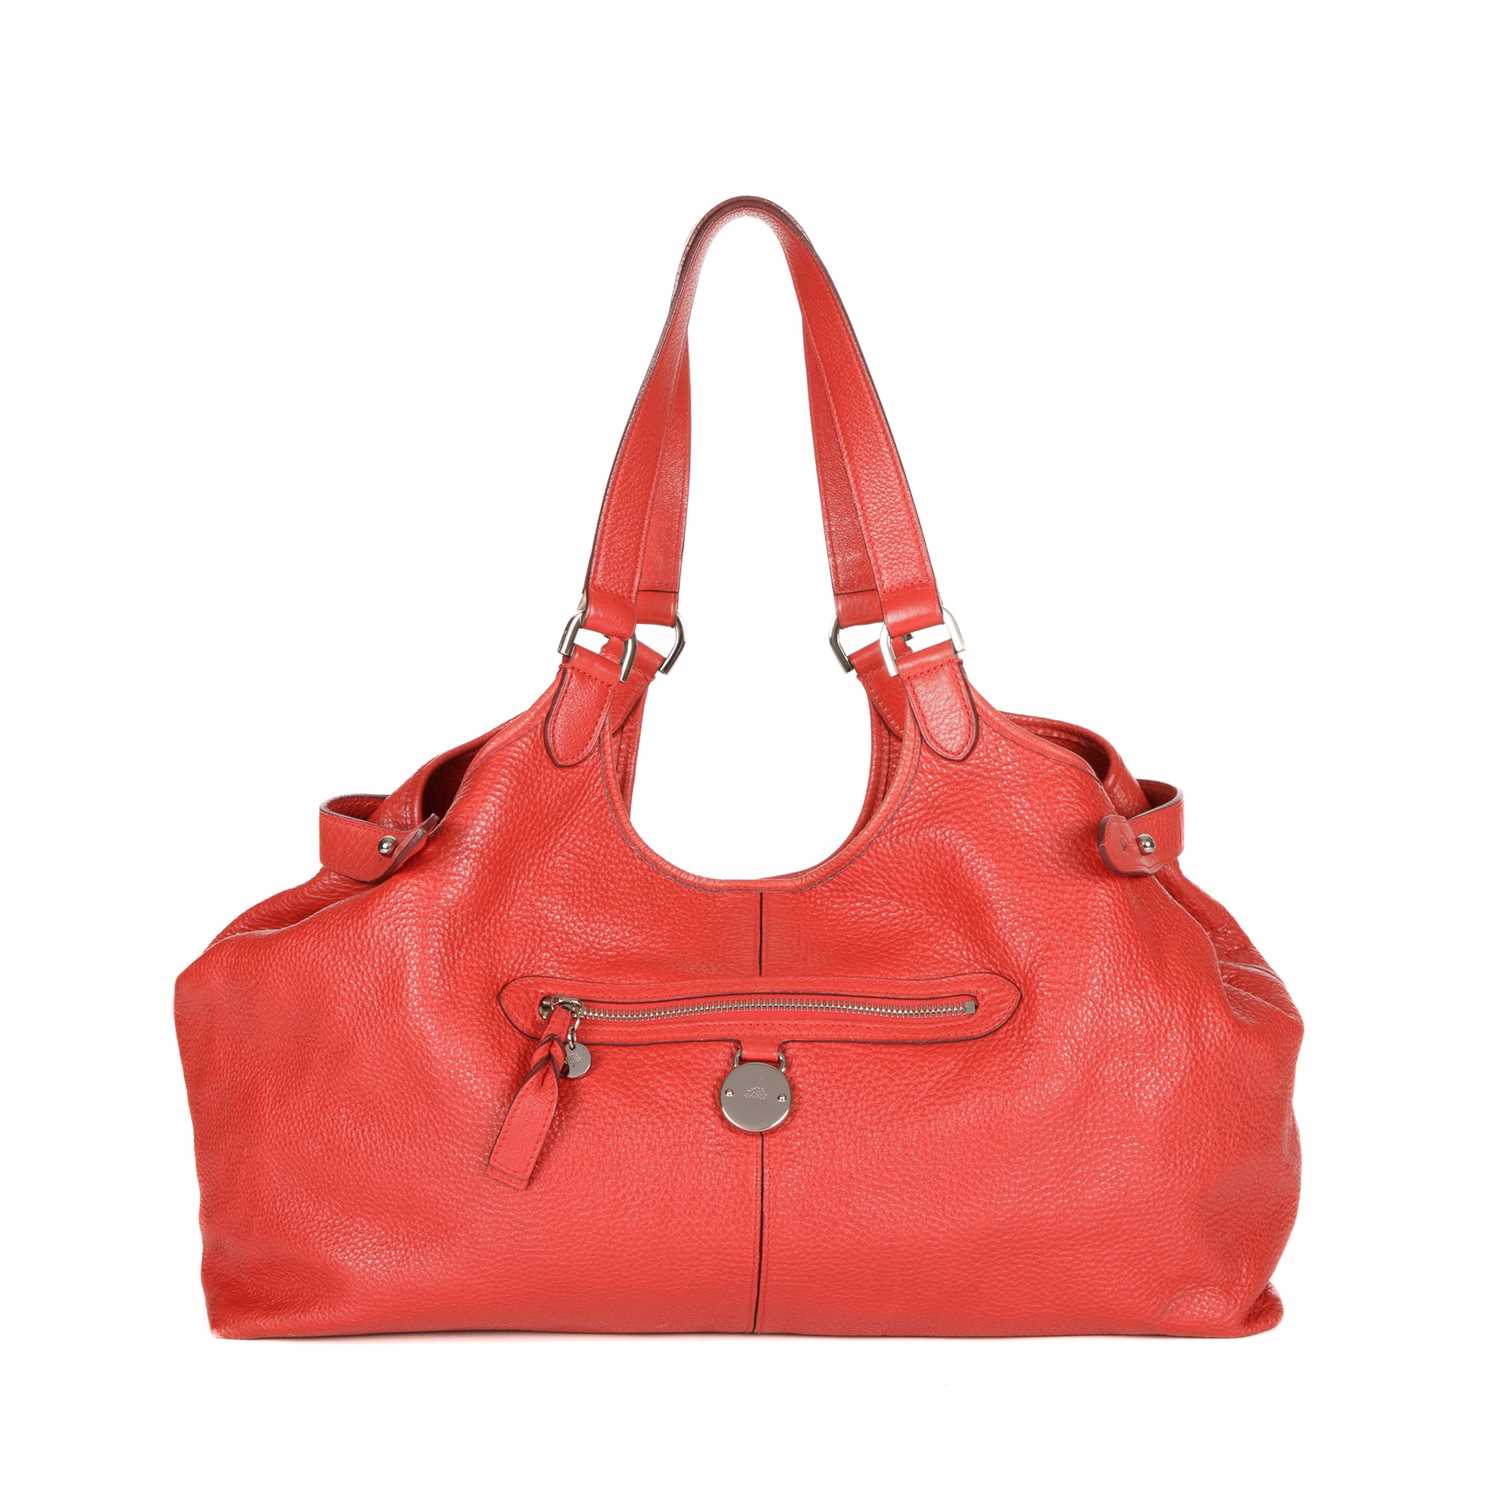 Mulberry, a large leather Somerset handbag, featuring a grained red leather exterior, polished